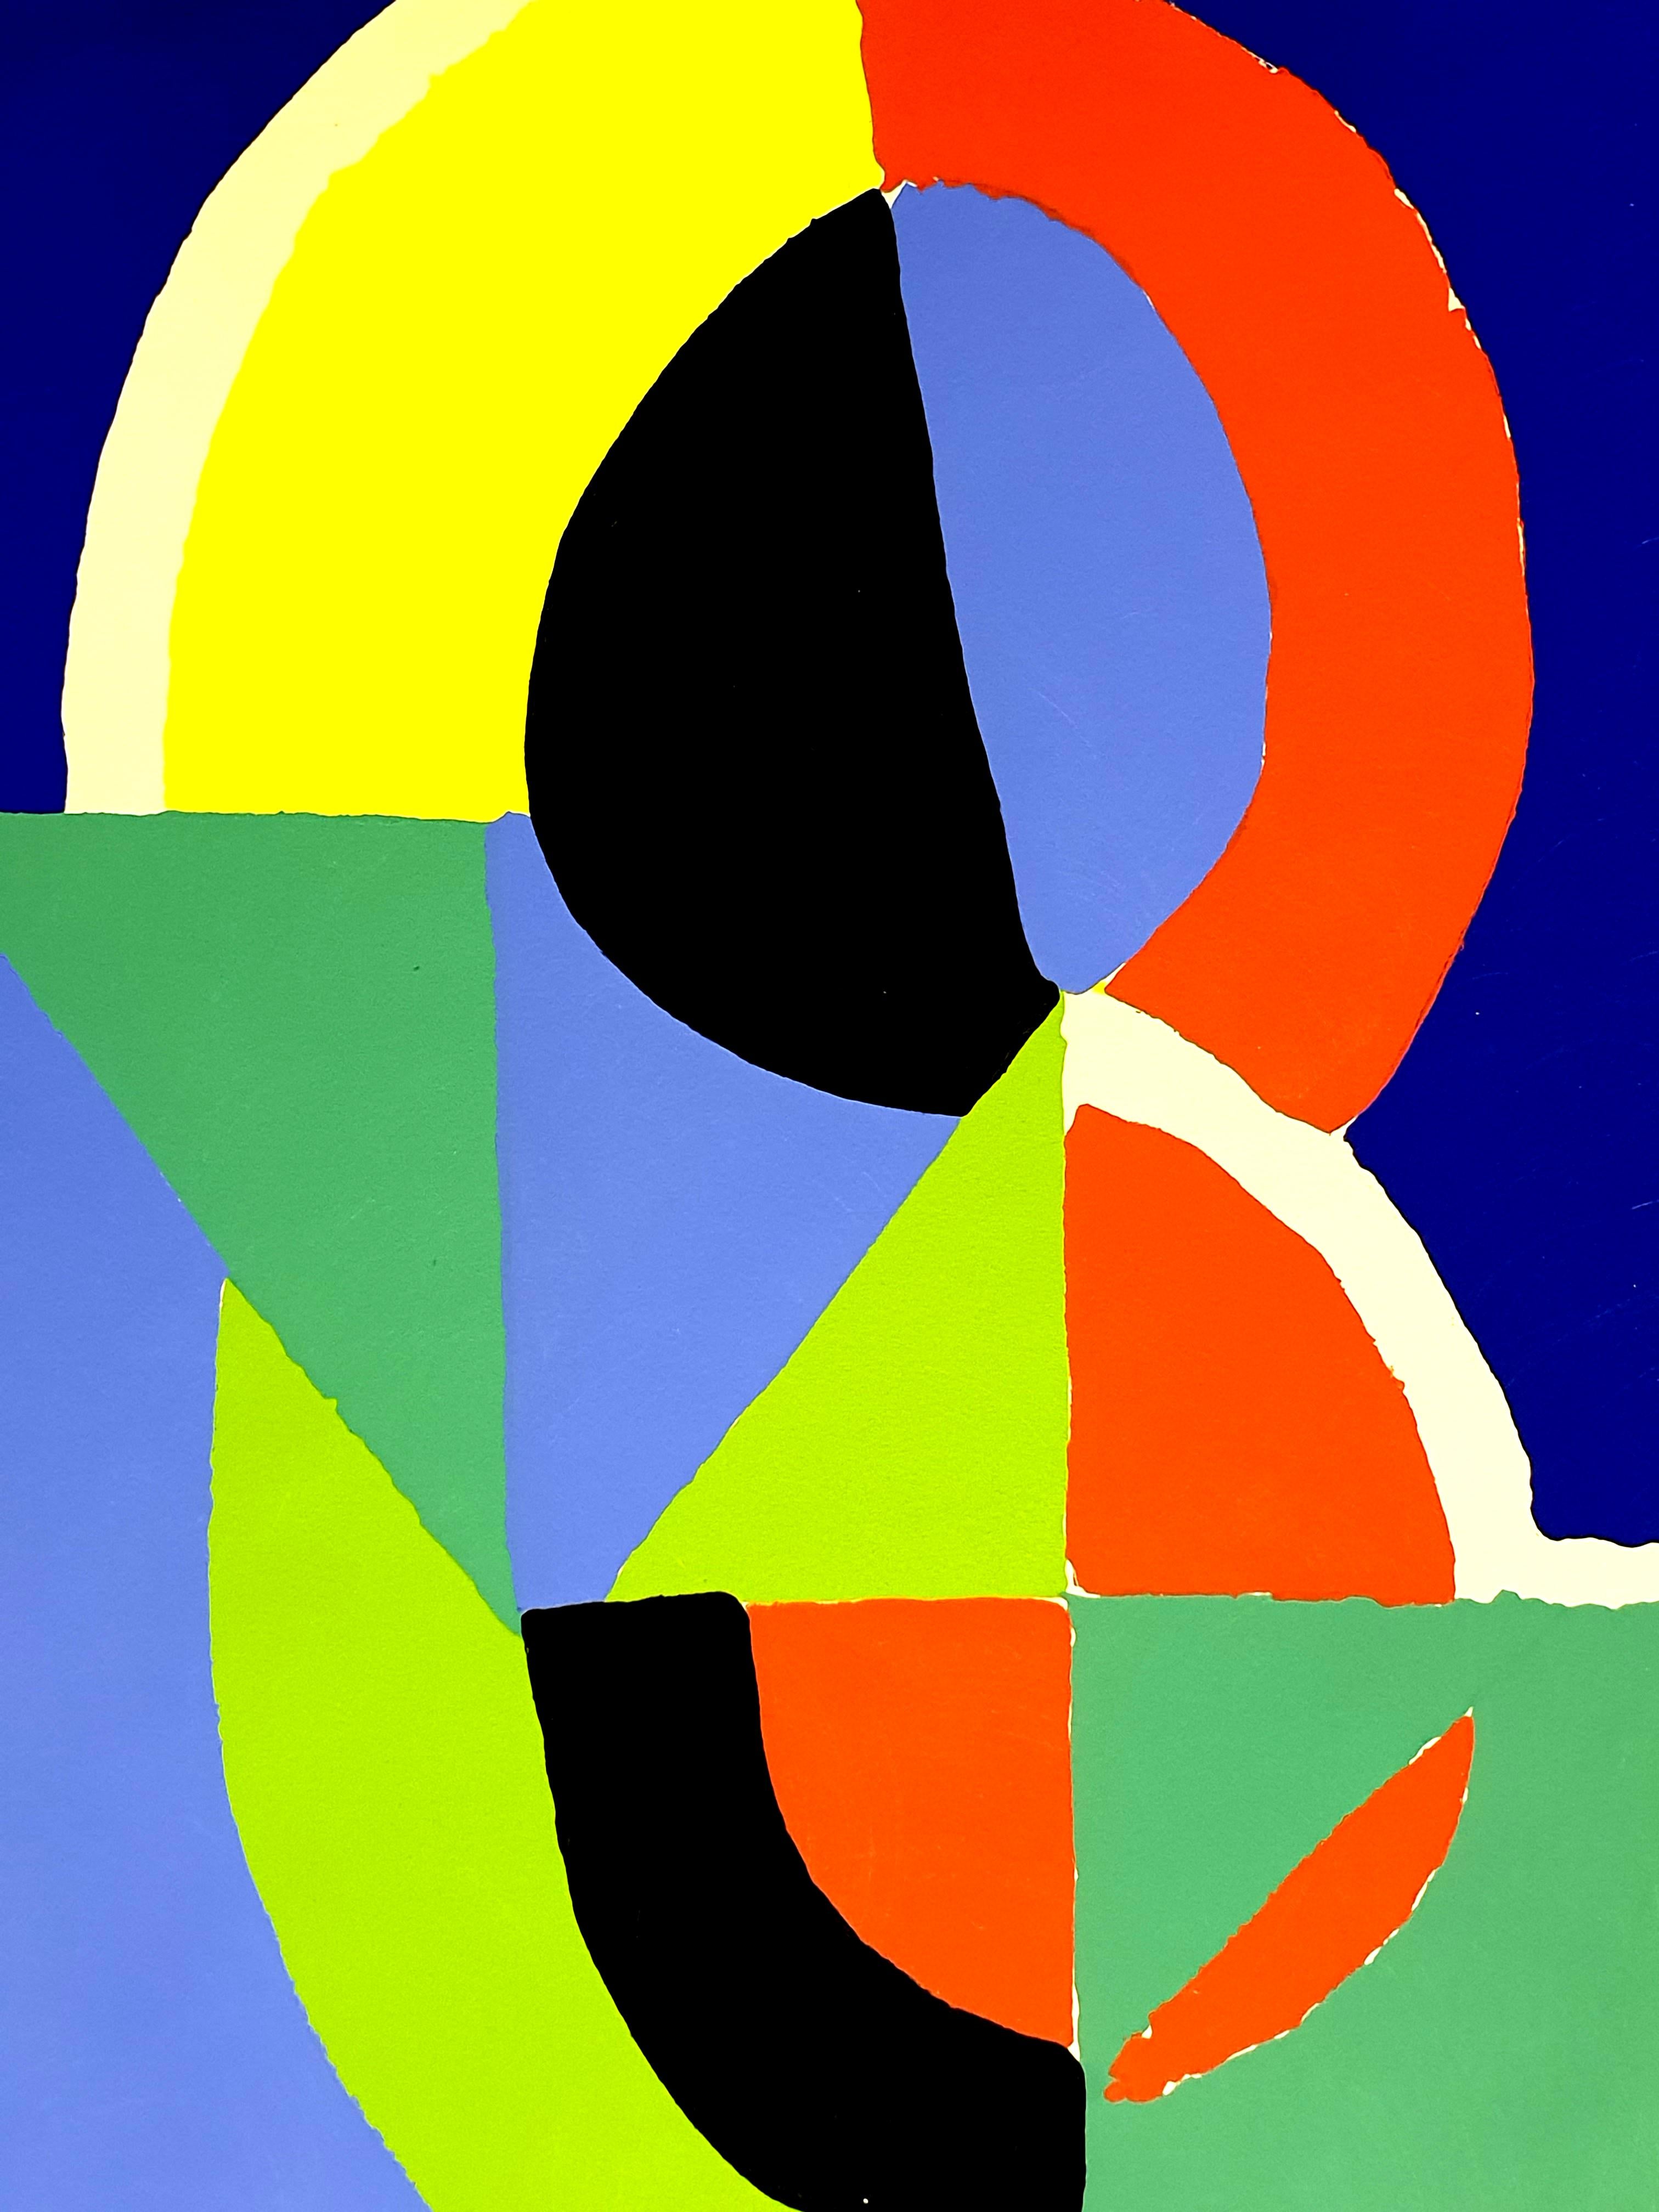 (after) Sonia Delaunay - Composition - Pochoir
1956
Dimensions: 32 x 25 cm
Revue XXe Siècle 
Cahiers d'art published under the direction of G. di San Lazzaro.
Unsigned and unumbered as issued